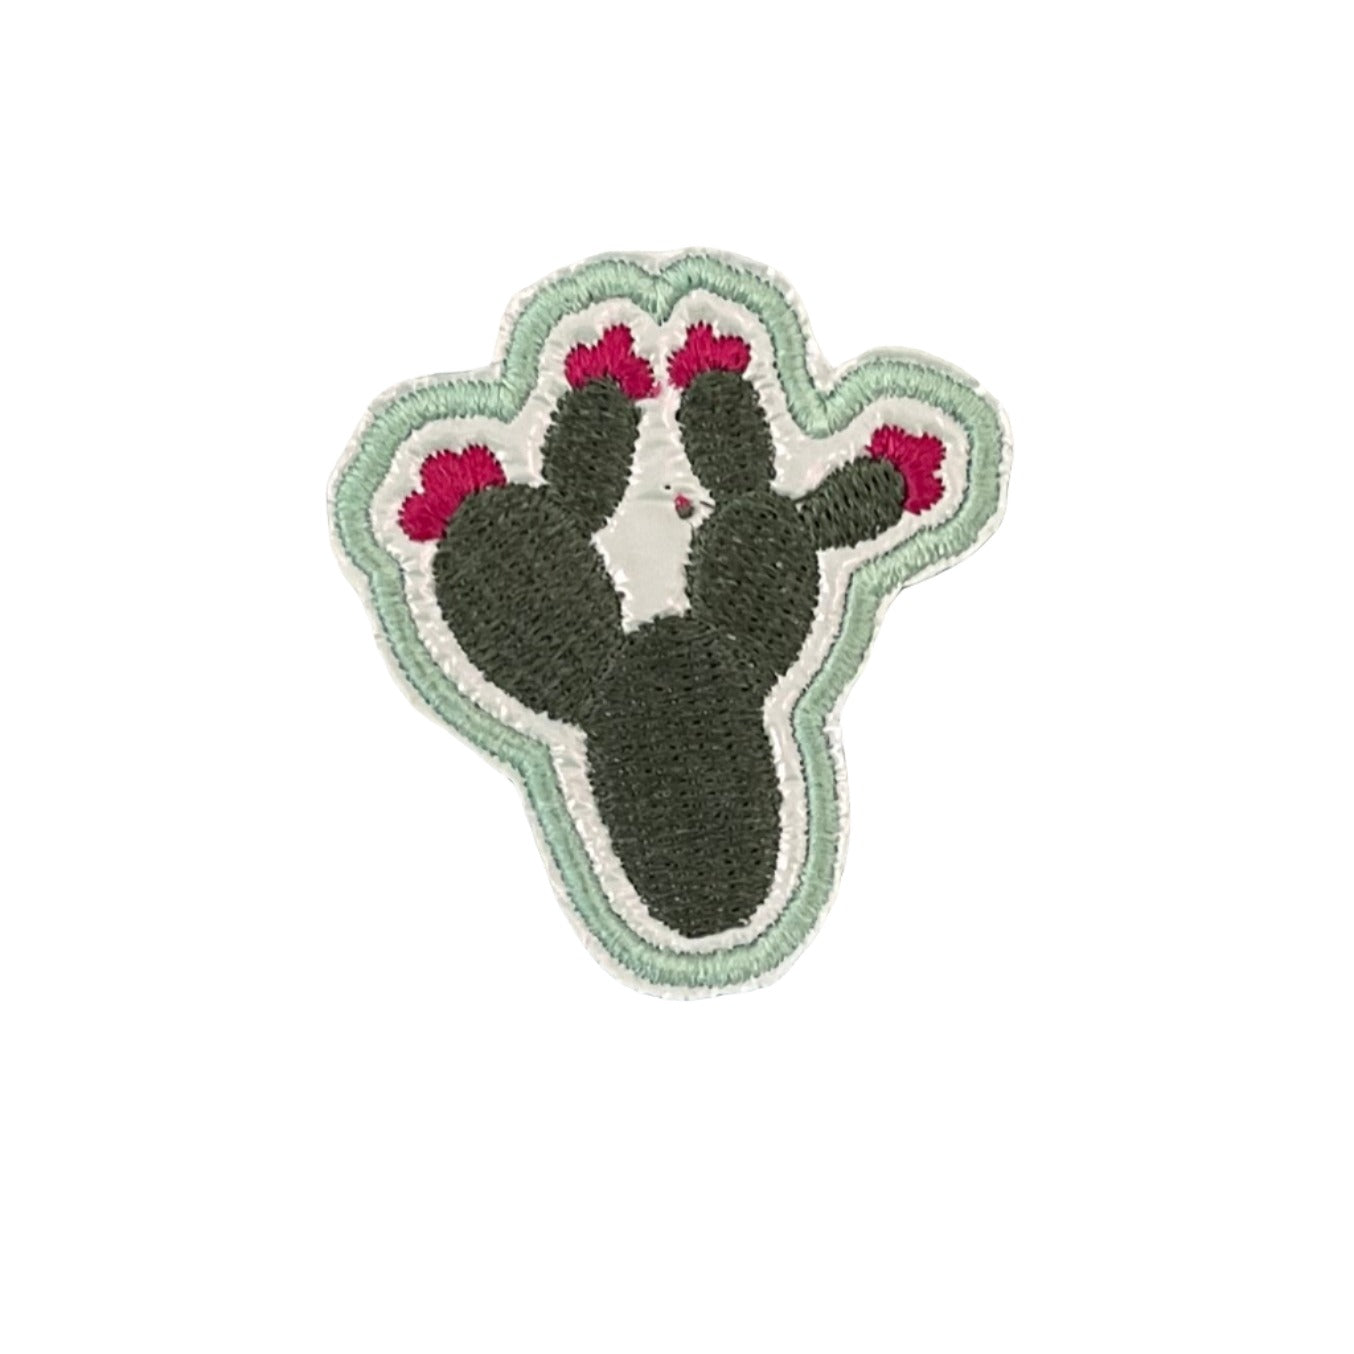 Southwest Cactus Patch with Pink Flowers for Custom Hats, Apparel, and Accessories